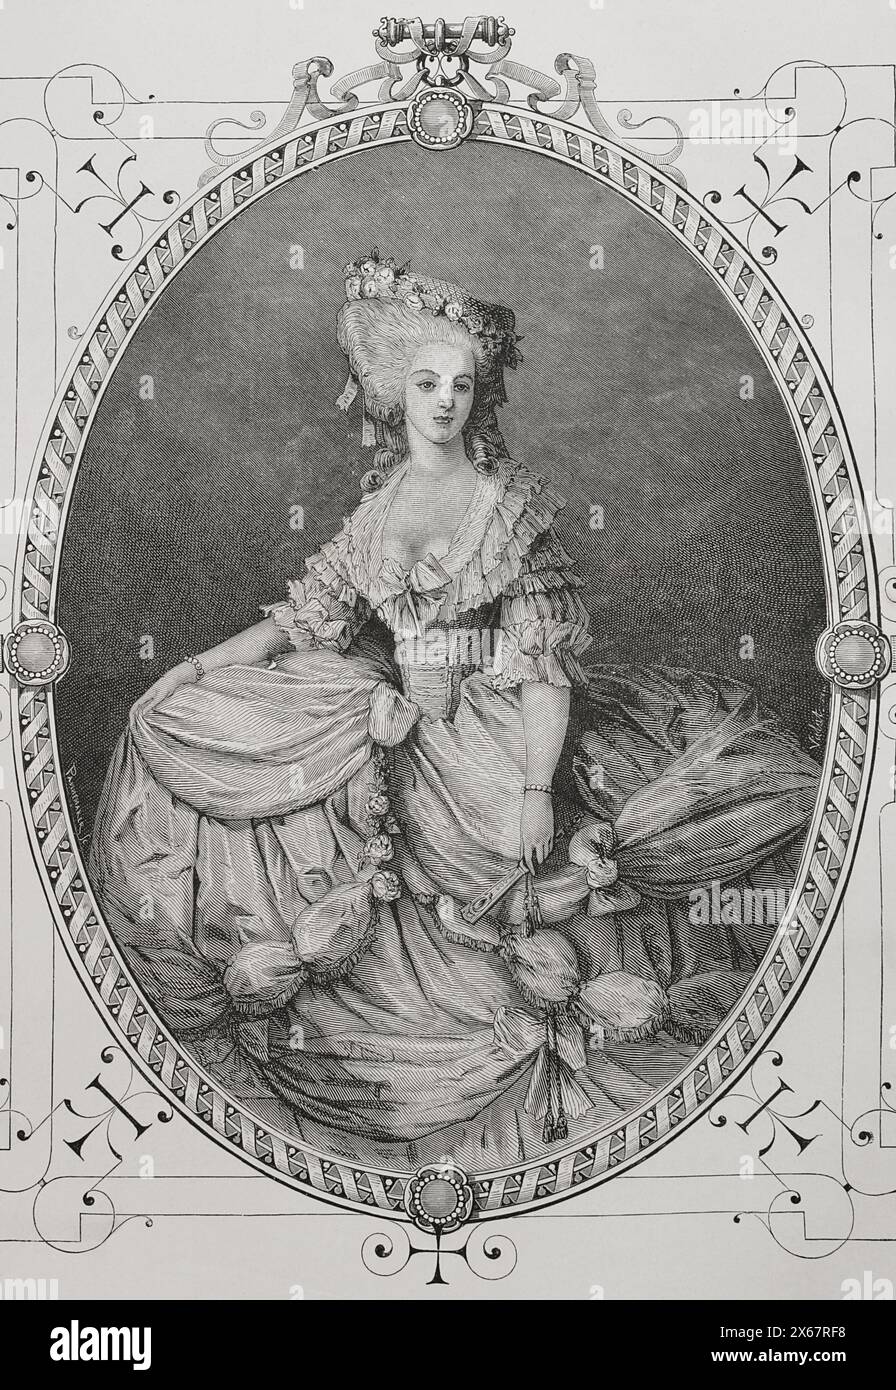 Marie Thérèse Louise of Savoy (1749-1792). Princess de Lamballe. French aristocrat. Personal friend and confidante of Queen Marie Antoinette. She was killed during the massacres of September 1792. Portrait. Engraving. 'History of the French Revolution'. Volume I, 1876. Stock Photo